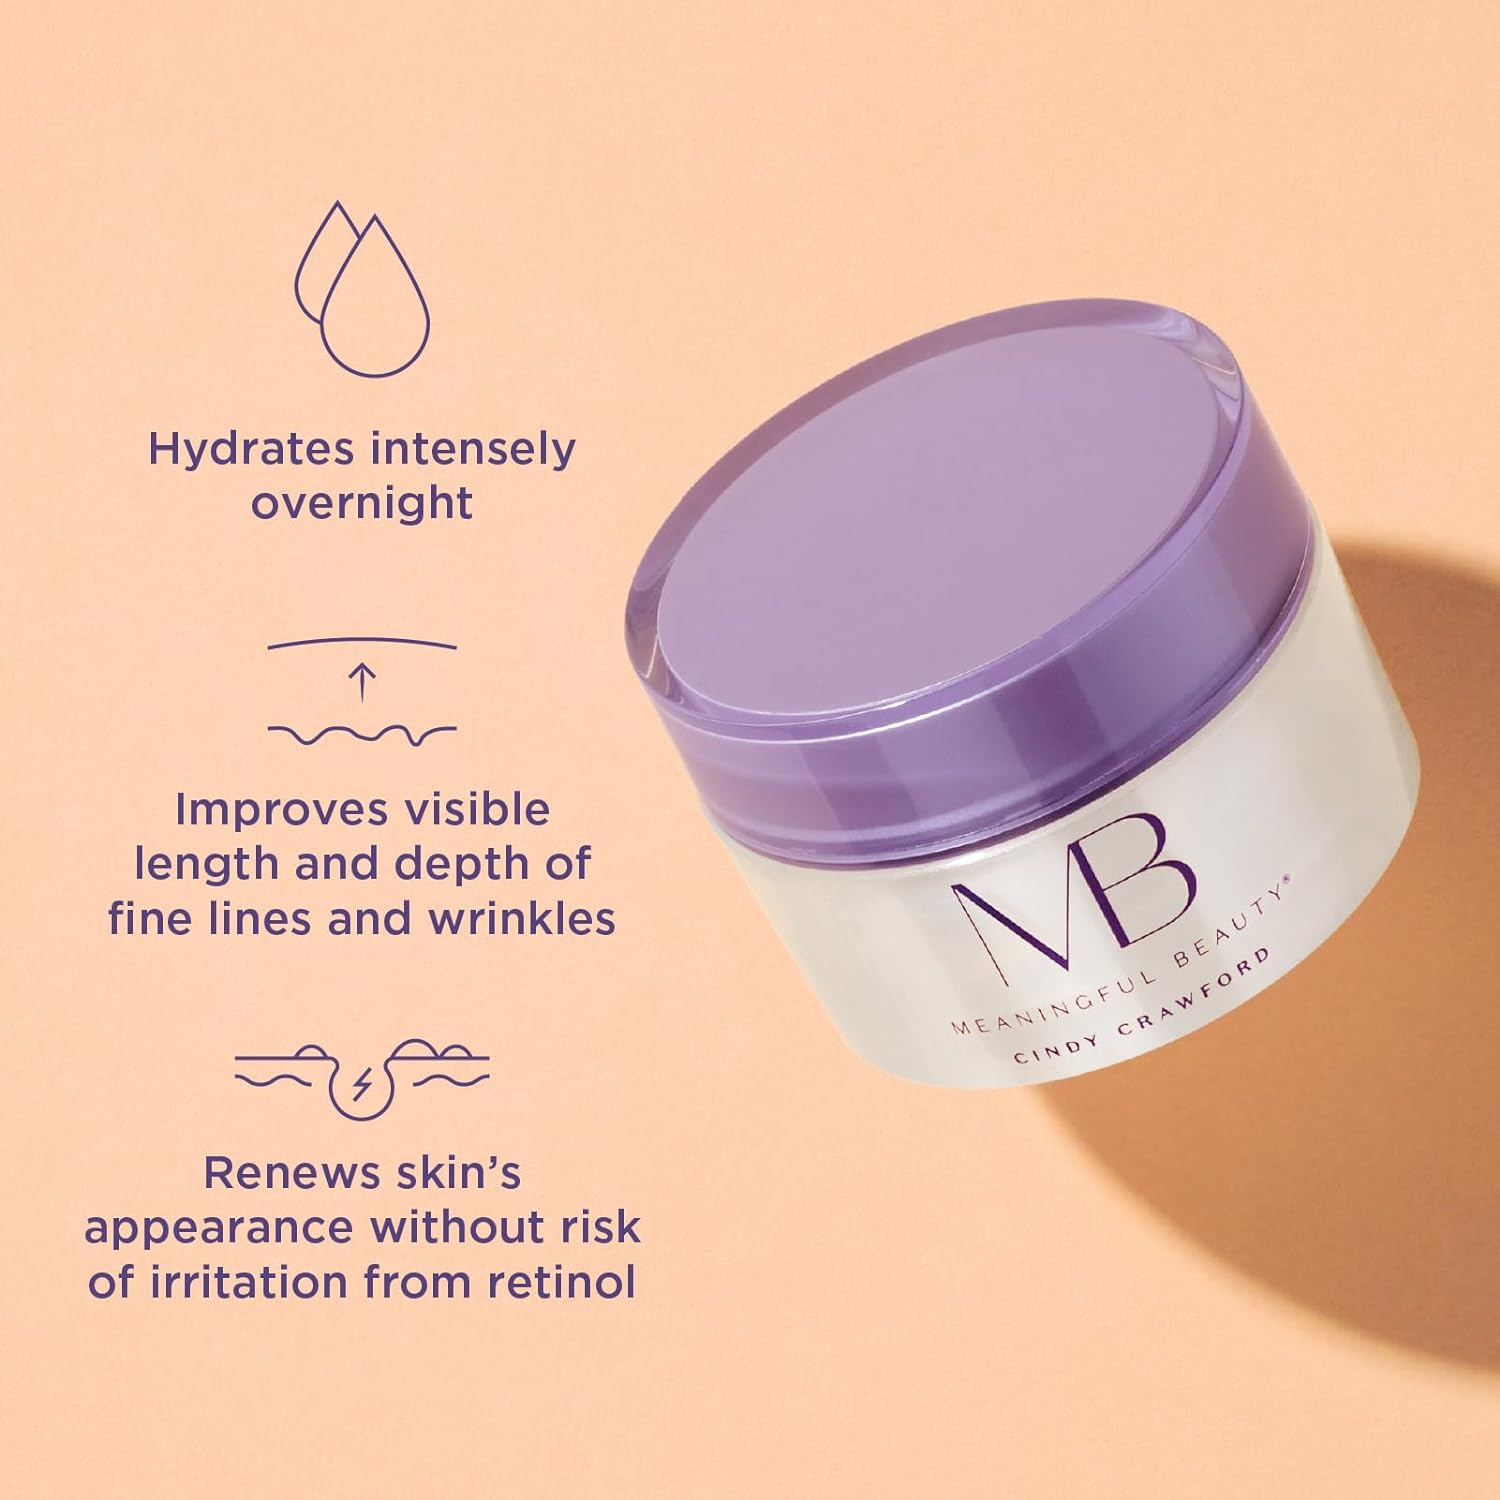 Meaningful Beauty AGE RECOVERY NIGHT CRÈME WITH MELON EXTRACT  RETINOL